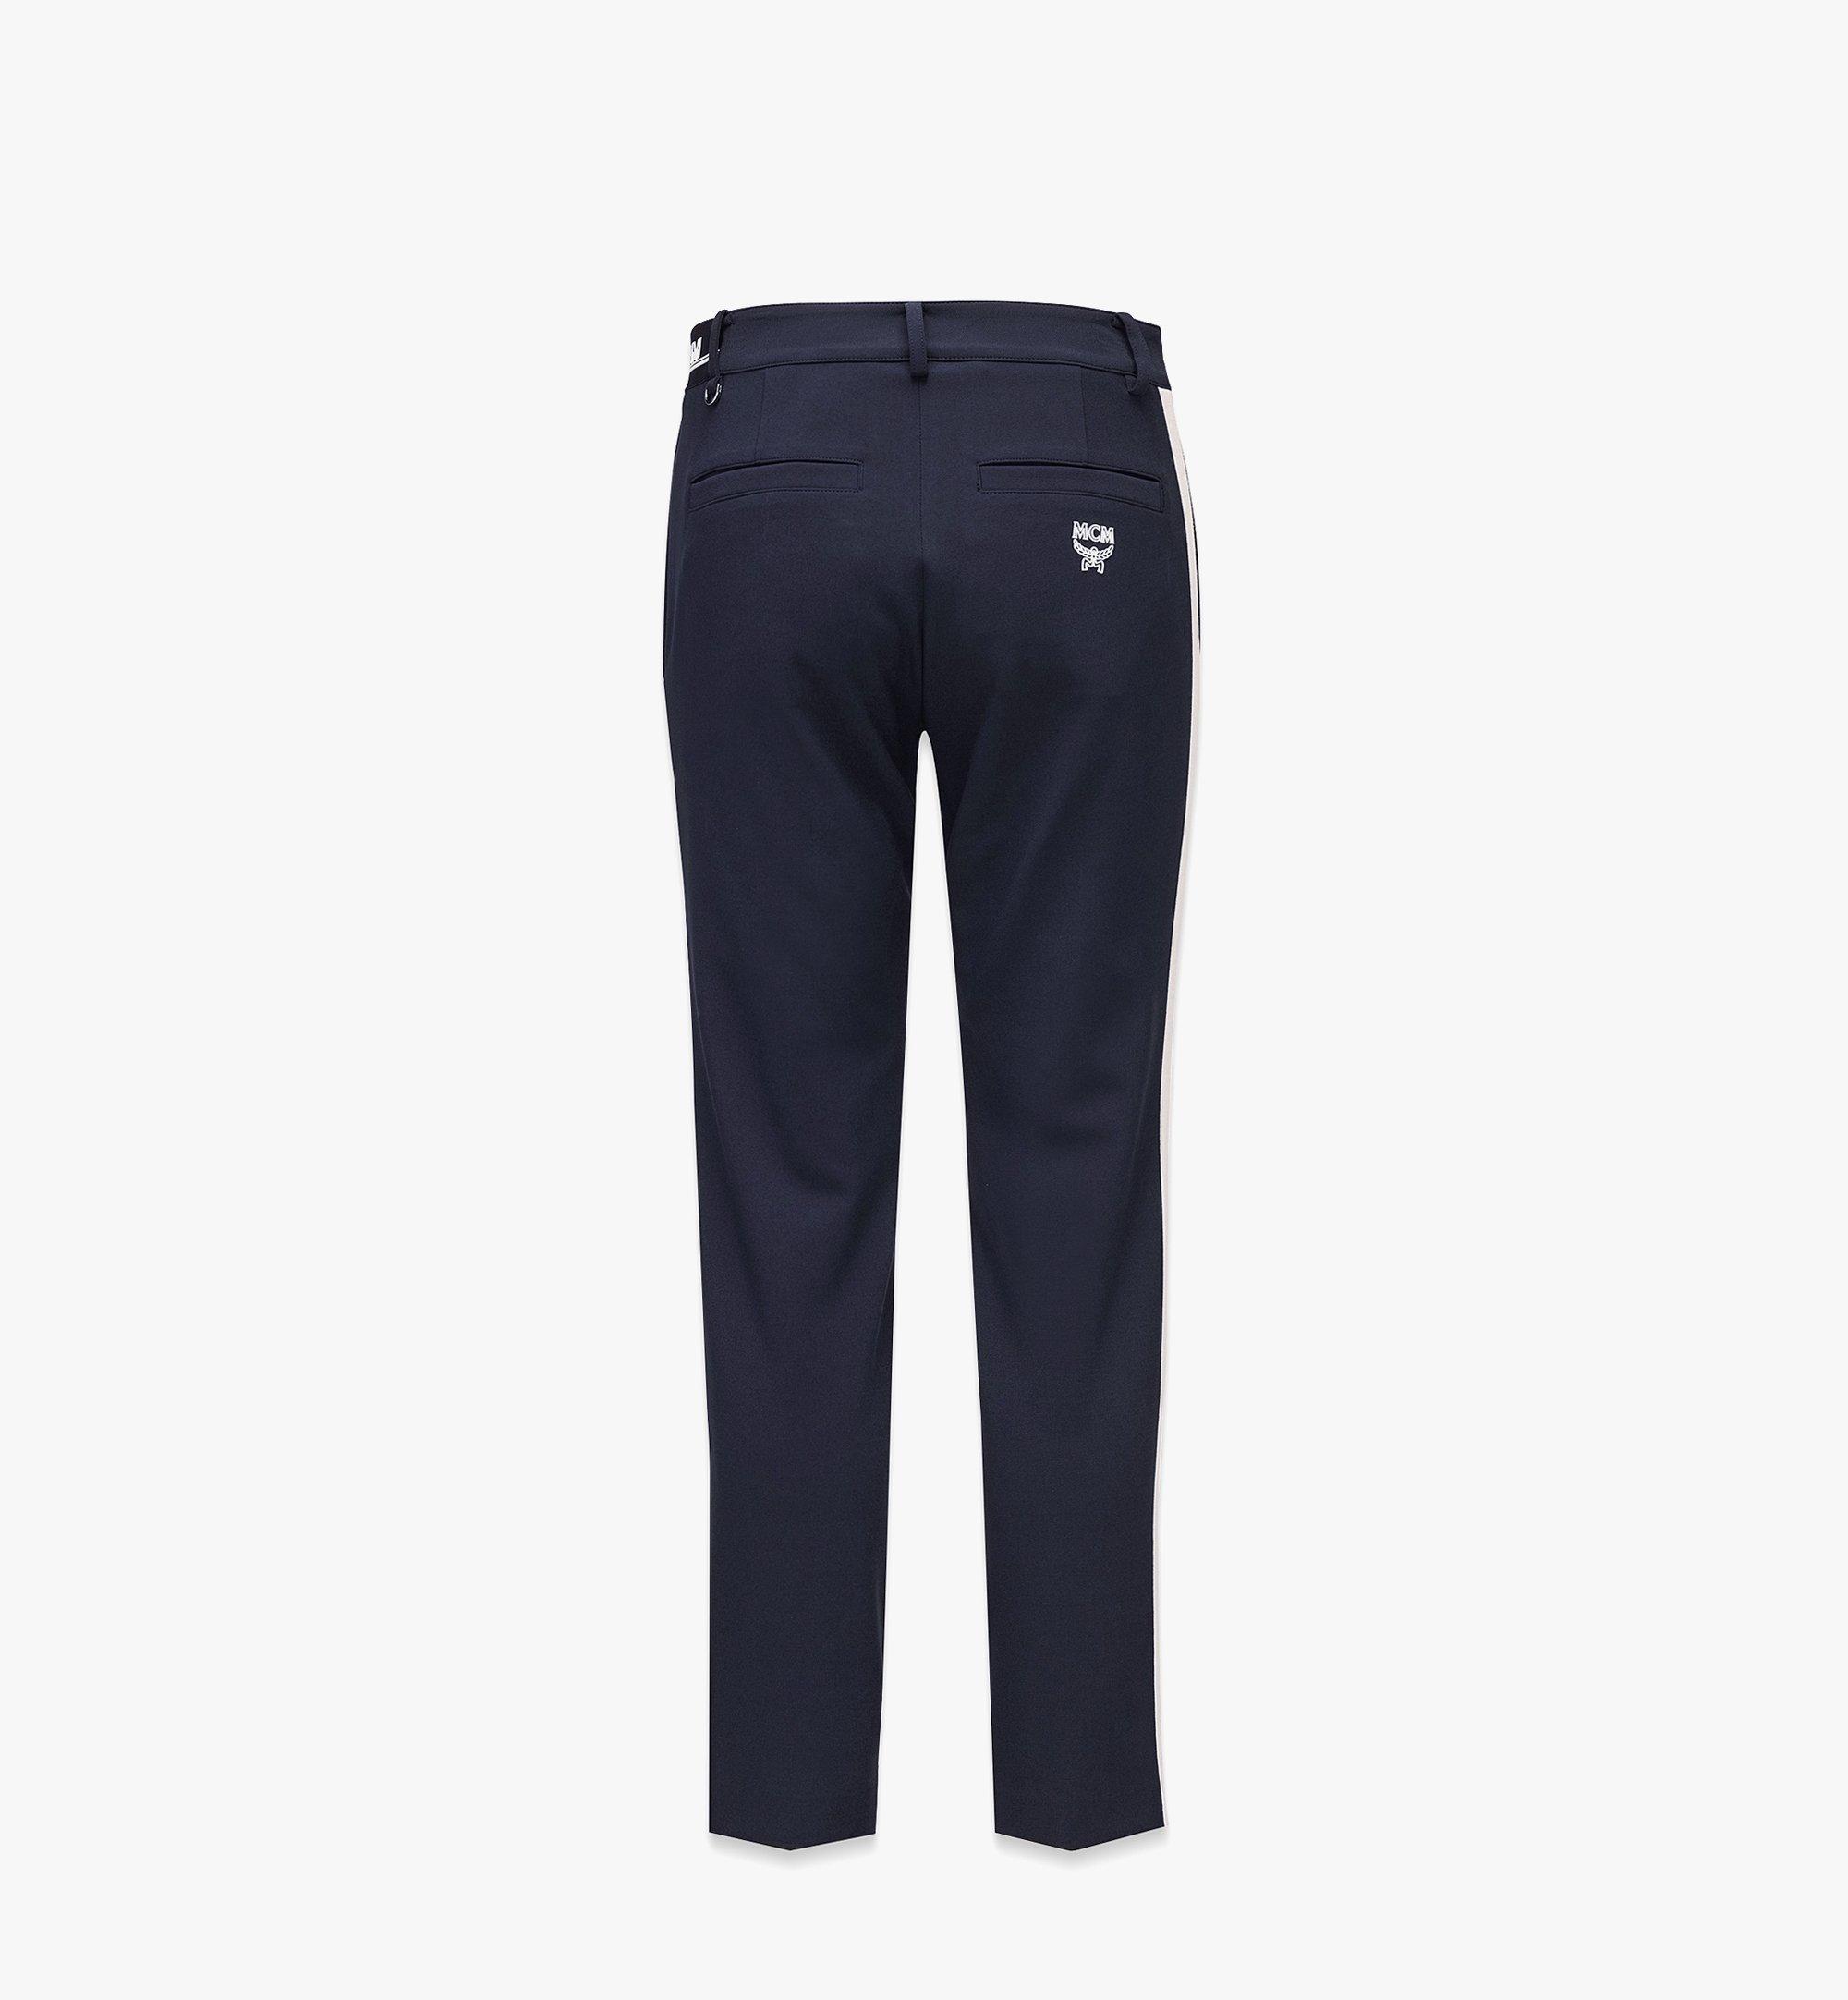 MCM Women’s Golf in the City Pants Navy MFPDSMM10VD00M Alternate View 1